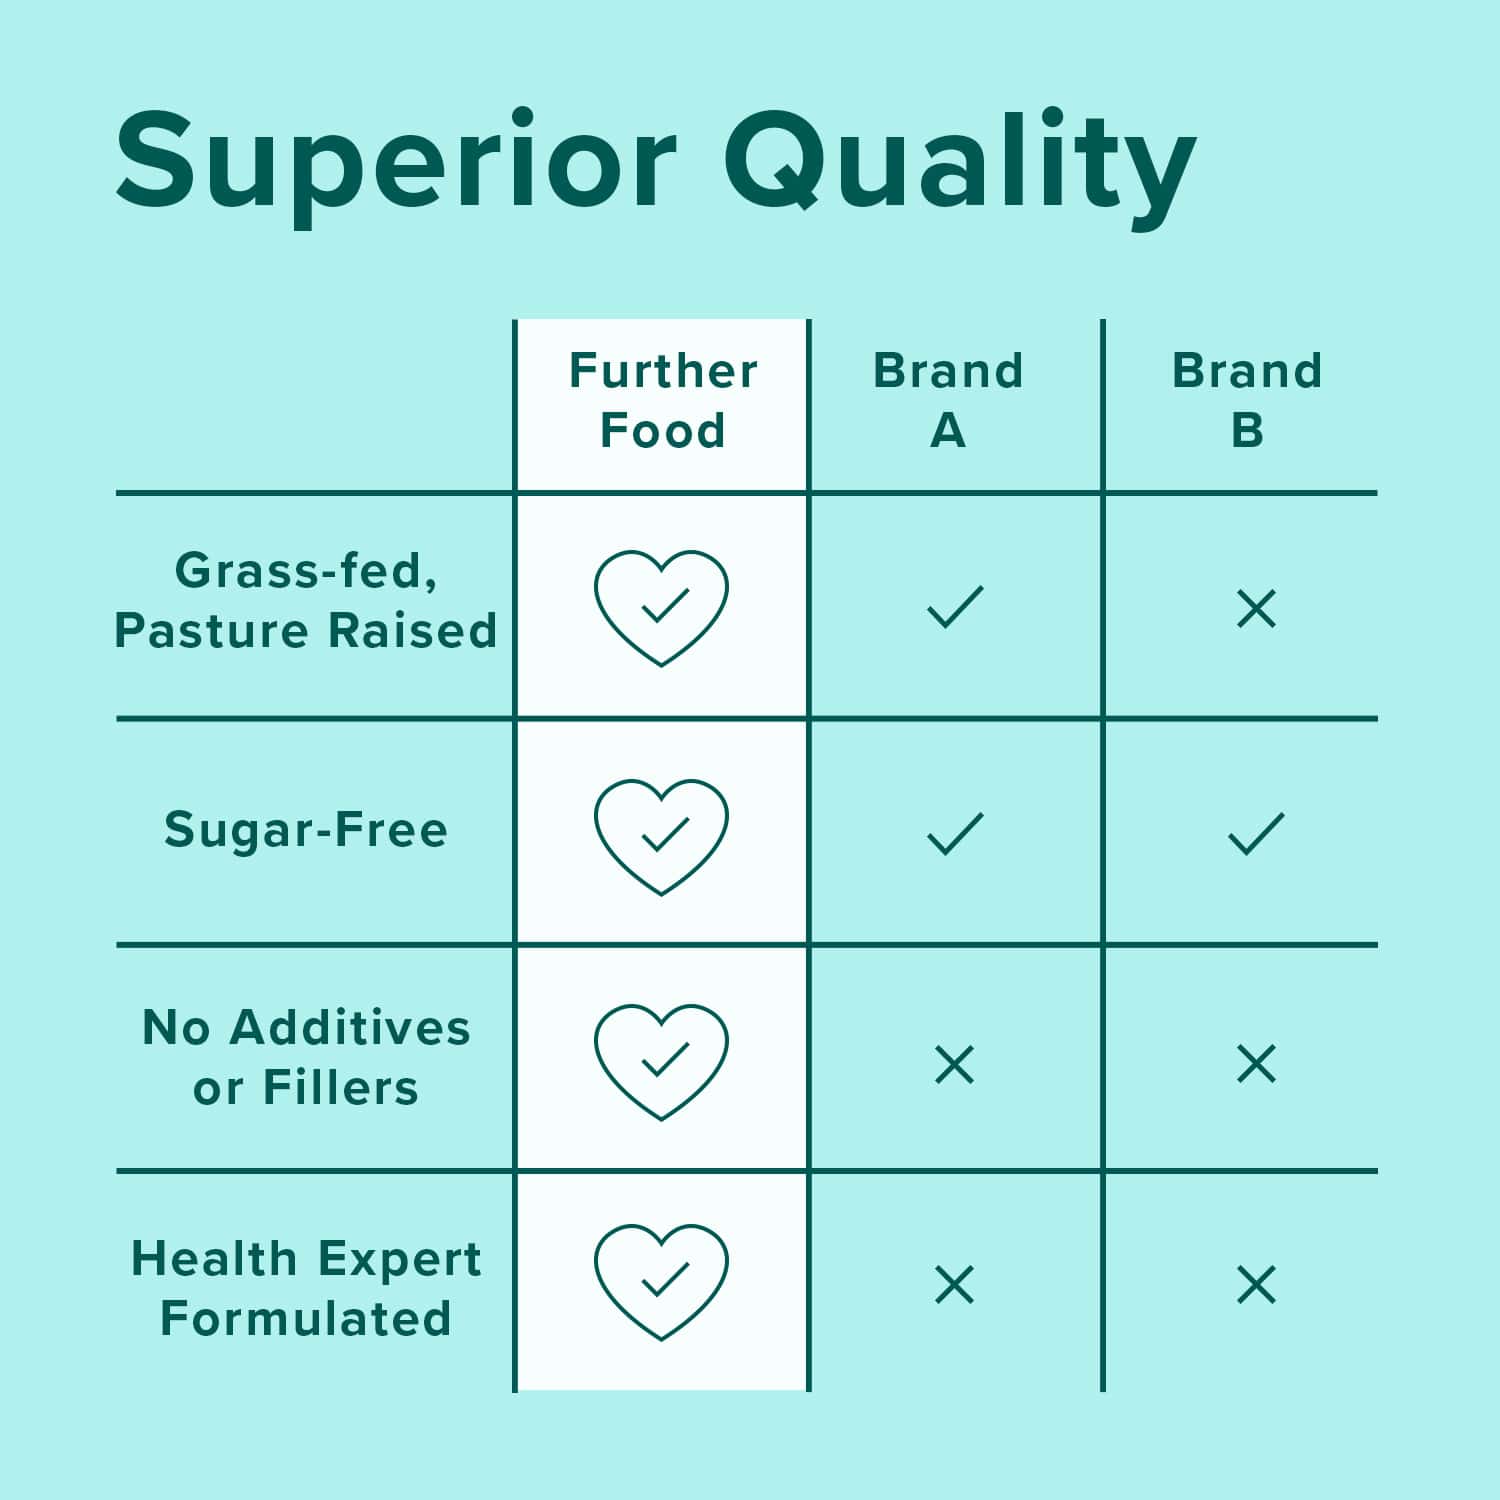 Superior Quality: Grass-fed, pasture raised, sugar-free, no additives or fillers, health expert formulated. 